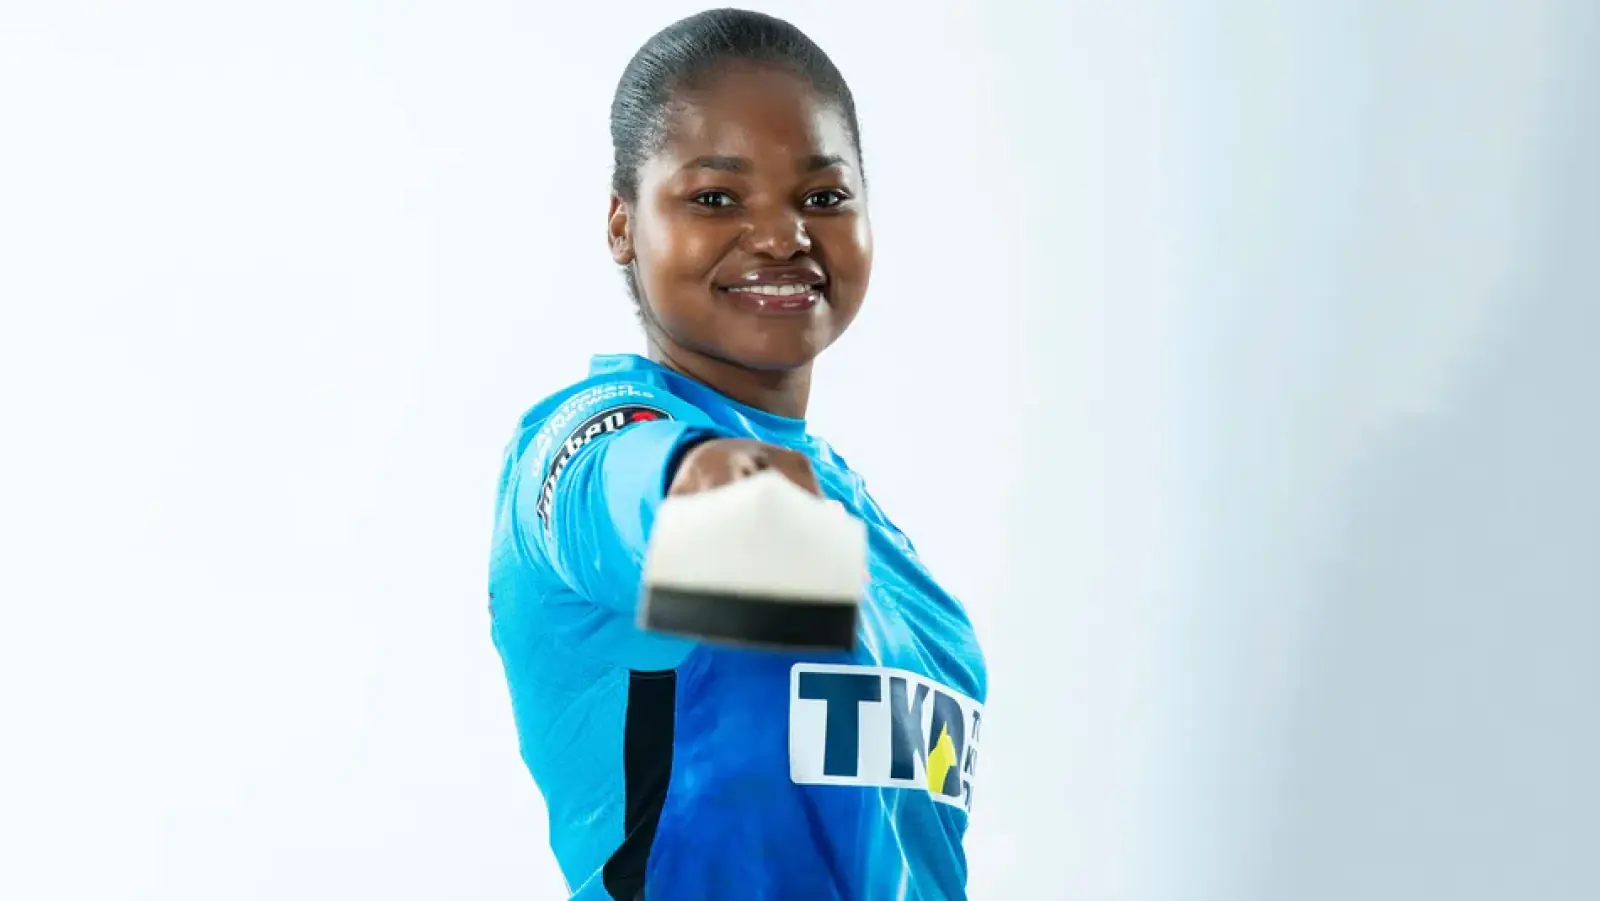 Cricketer used to practice catching and throwing with lemon in the absence of ball, now made her team champion